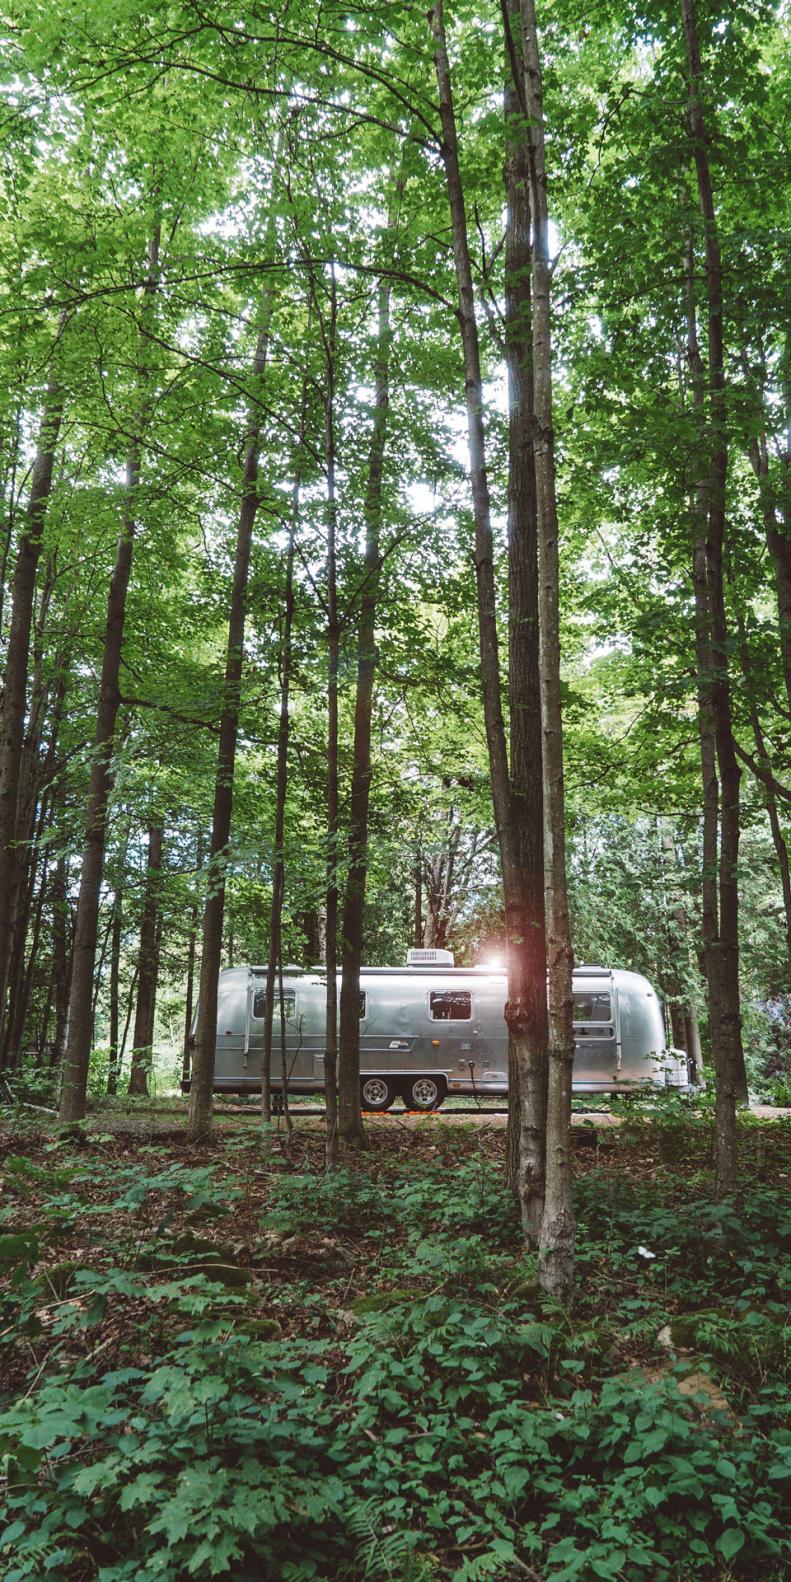 A 1976 Airstream Sovereign parked amid tall trees in forest.